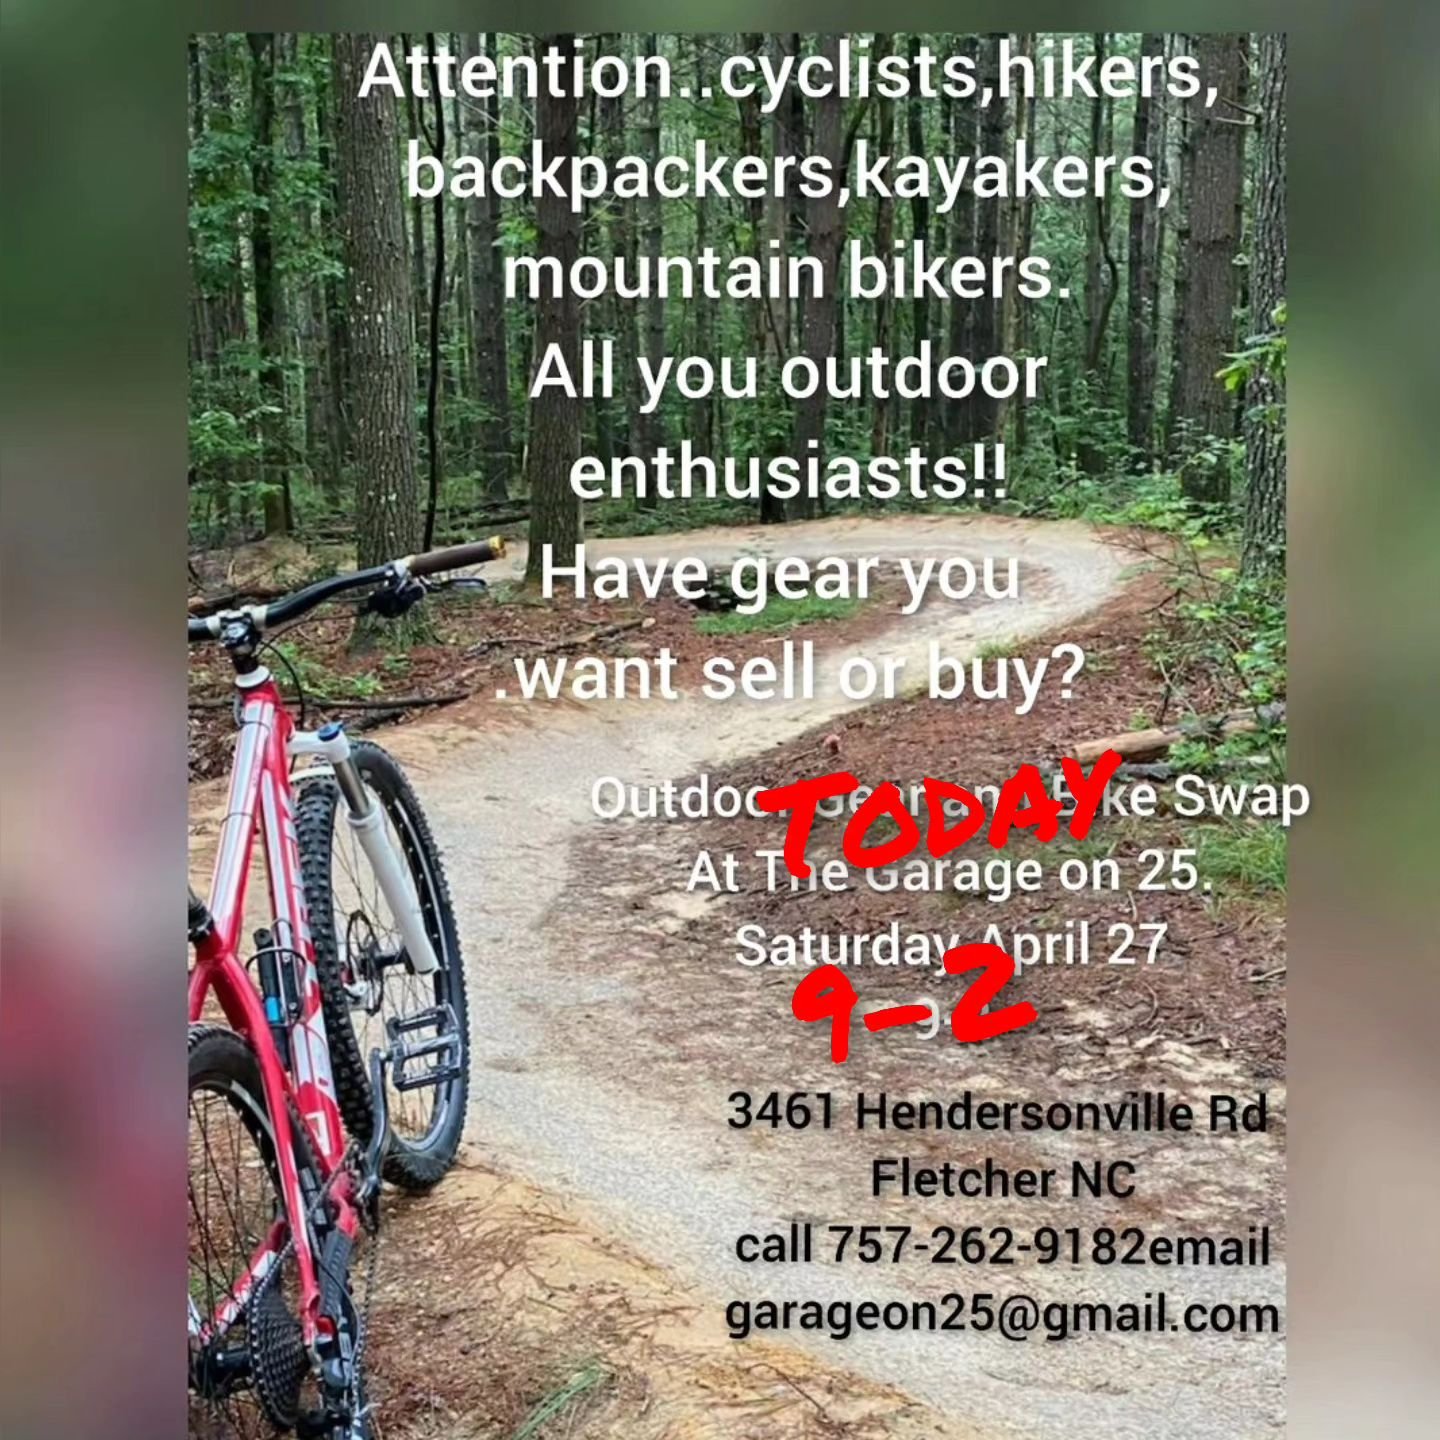 Outdoor Gear and Bike Swap..Today at The Garage on 25!!! 9-2 . Need to update your gear? Looking for a part for your bike..come check it out! Sellers in the field next to parking lot!
#wncbiking 
#wncoutdoorgear 
#ashevillebiking 
#ashevilleoutdoors 